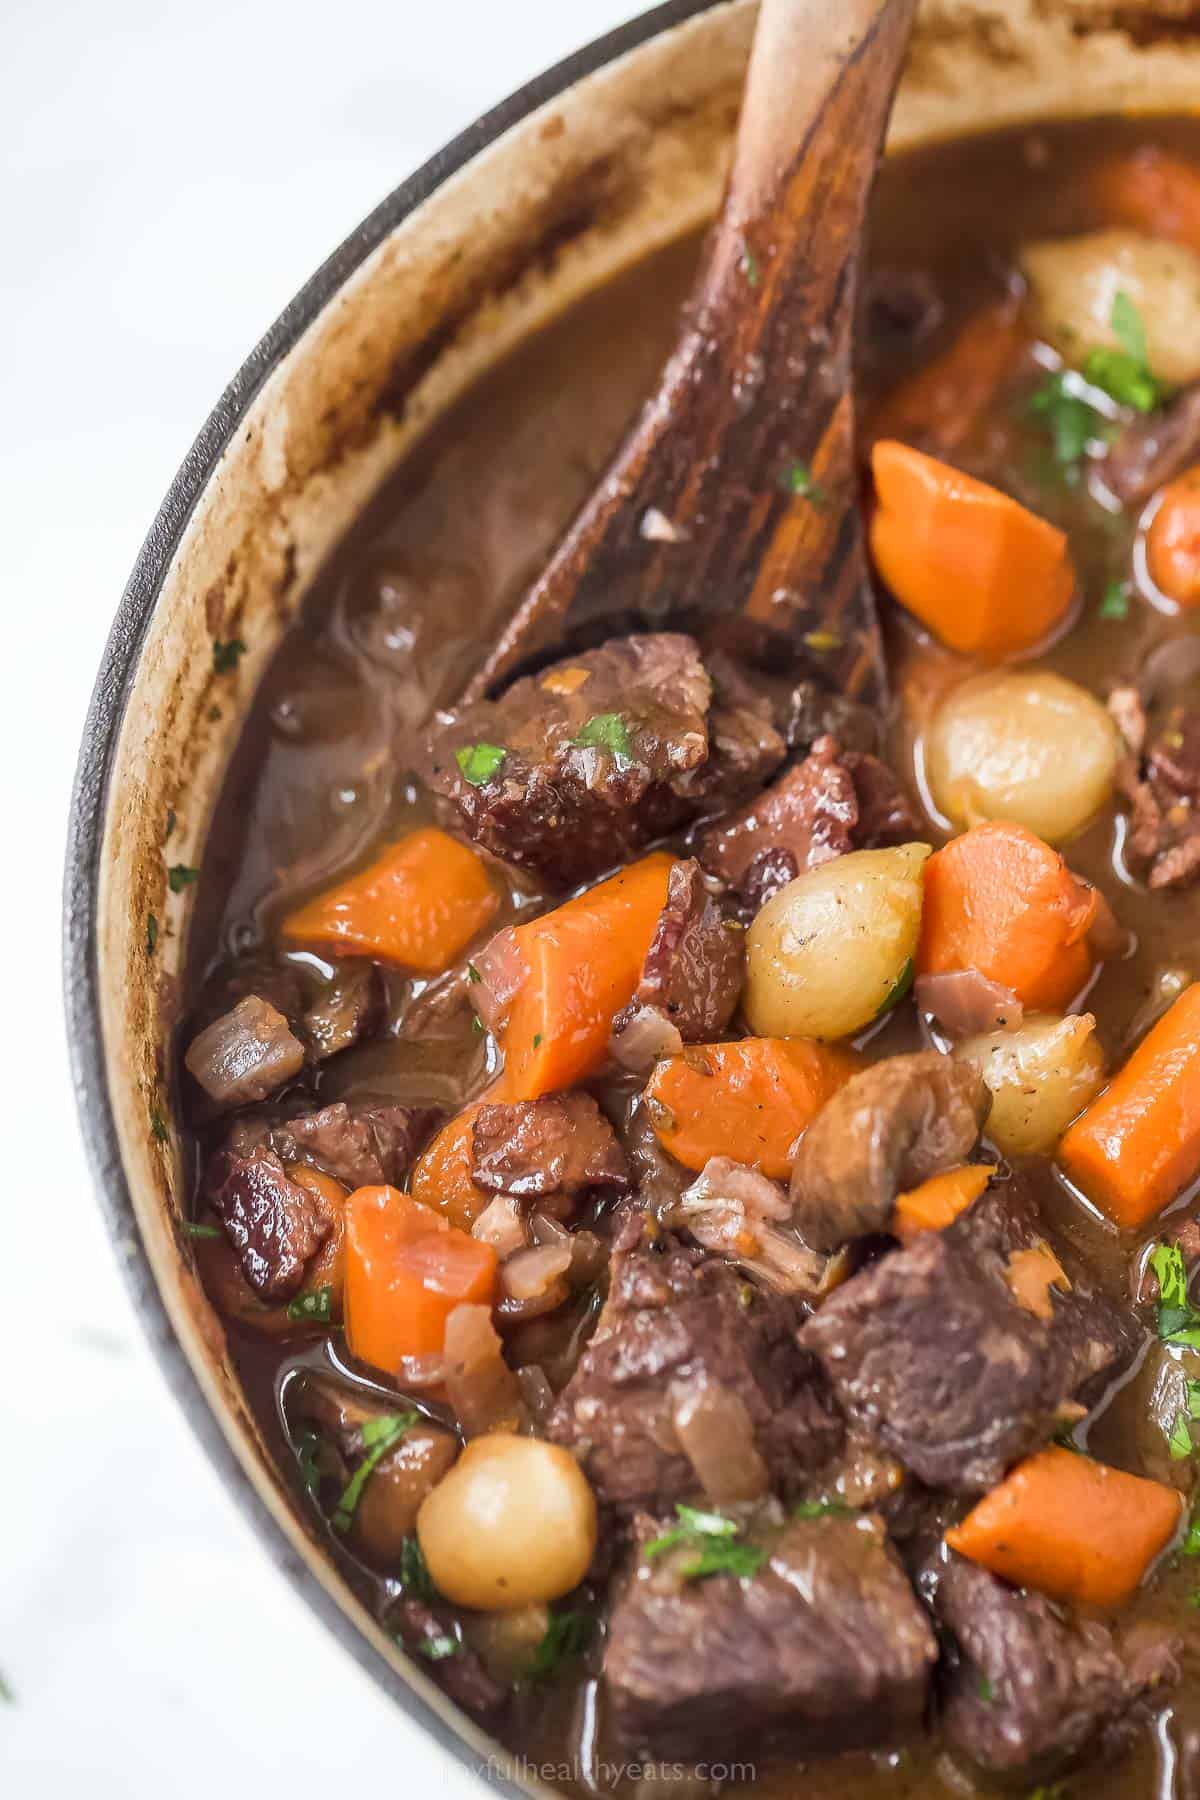 a pot of beef bourguignon with carrots, pearl onions, and mushrooms in a dark gravy